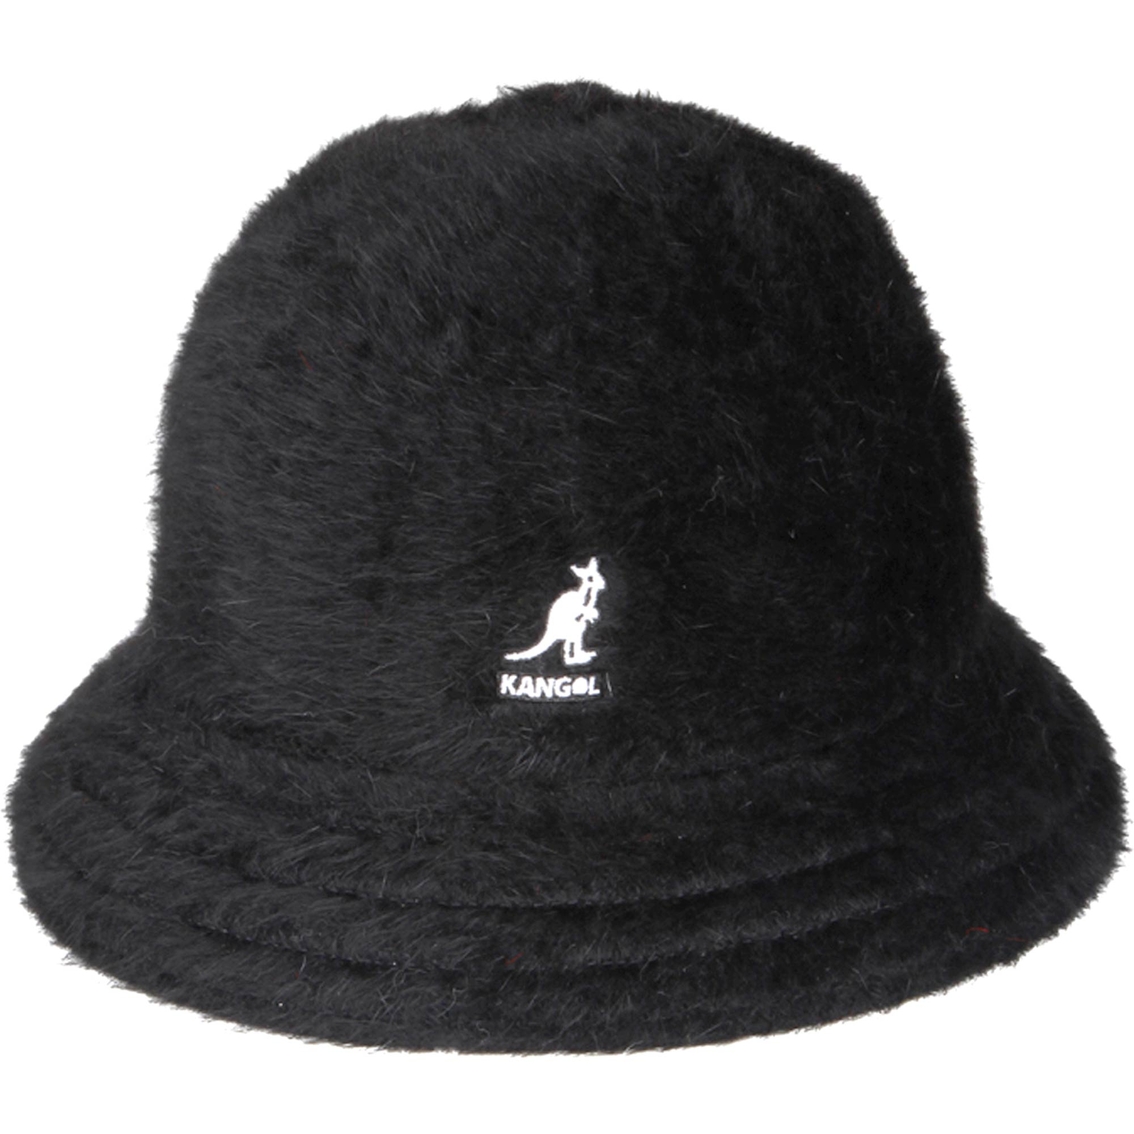 Kangol Furgora Casual Hat | Hats | Father's Day Shop | Shop The Exchange